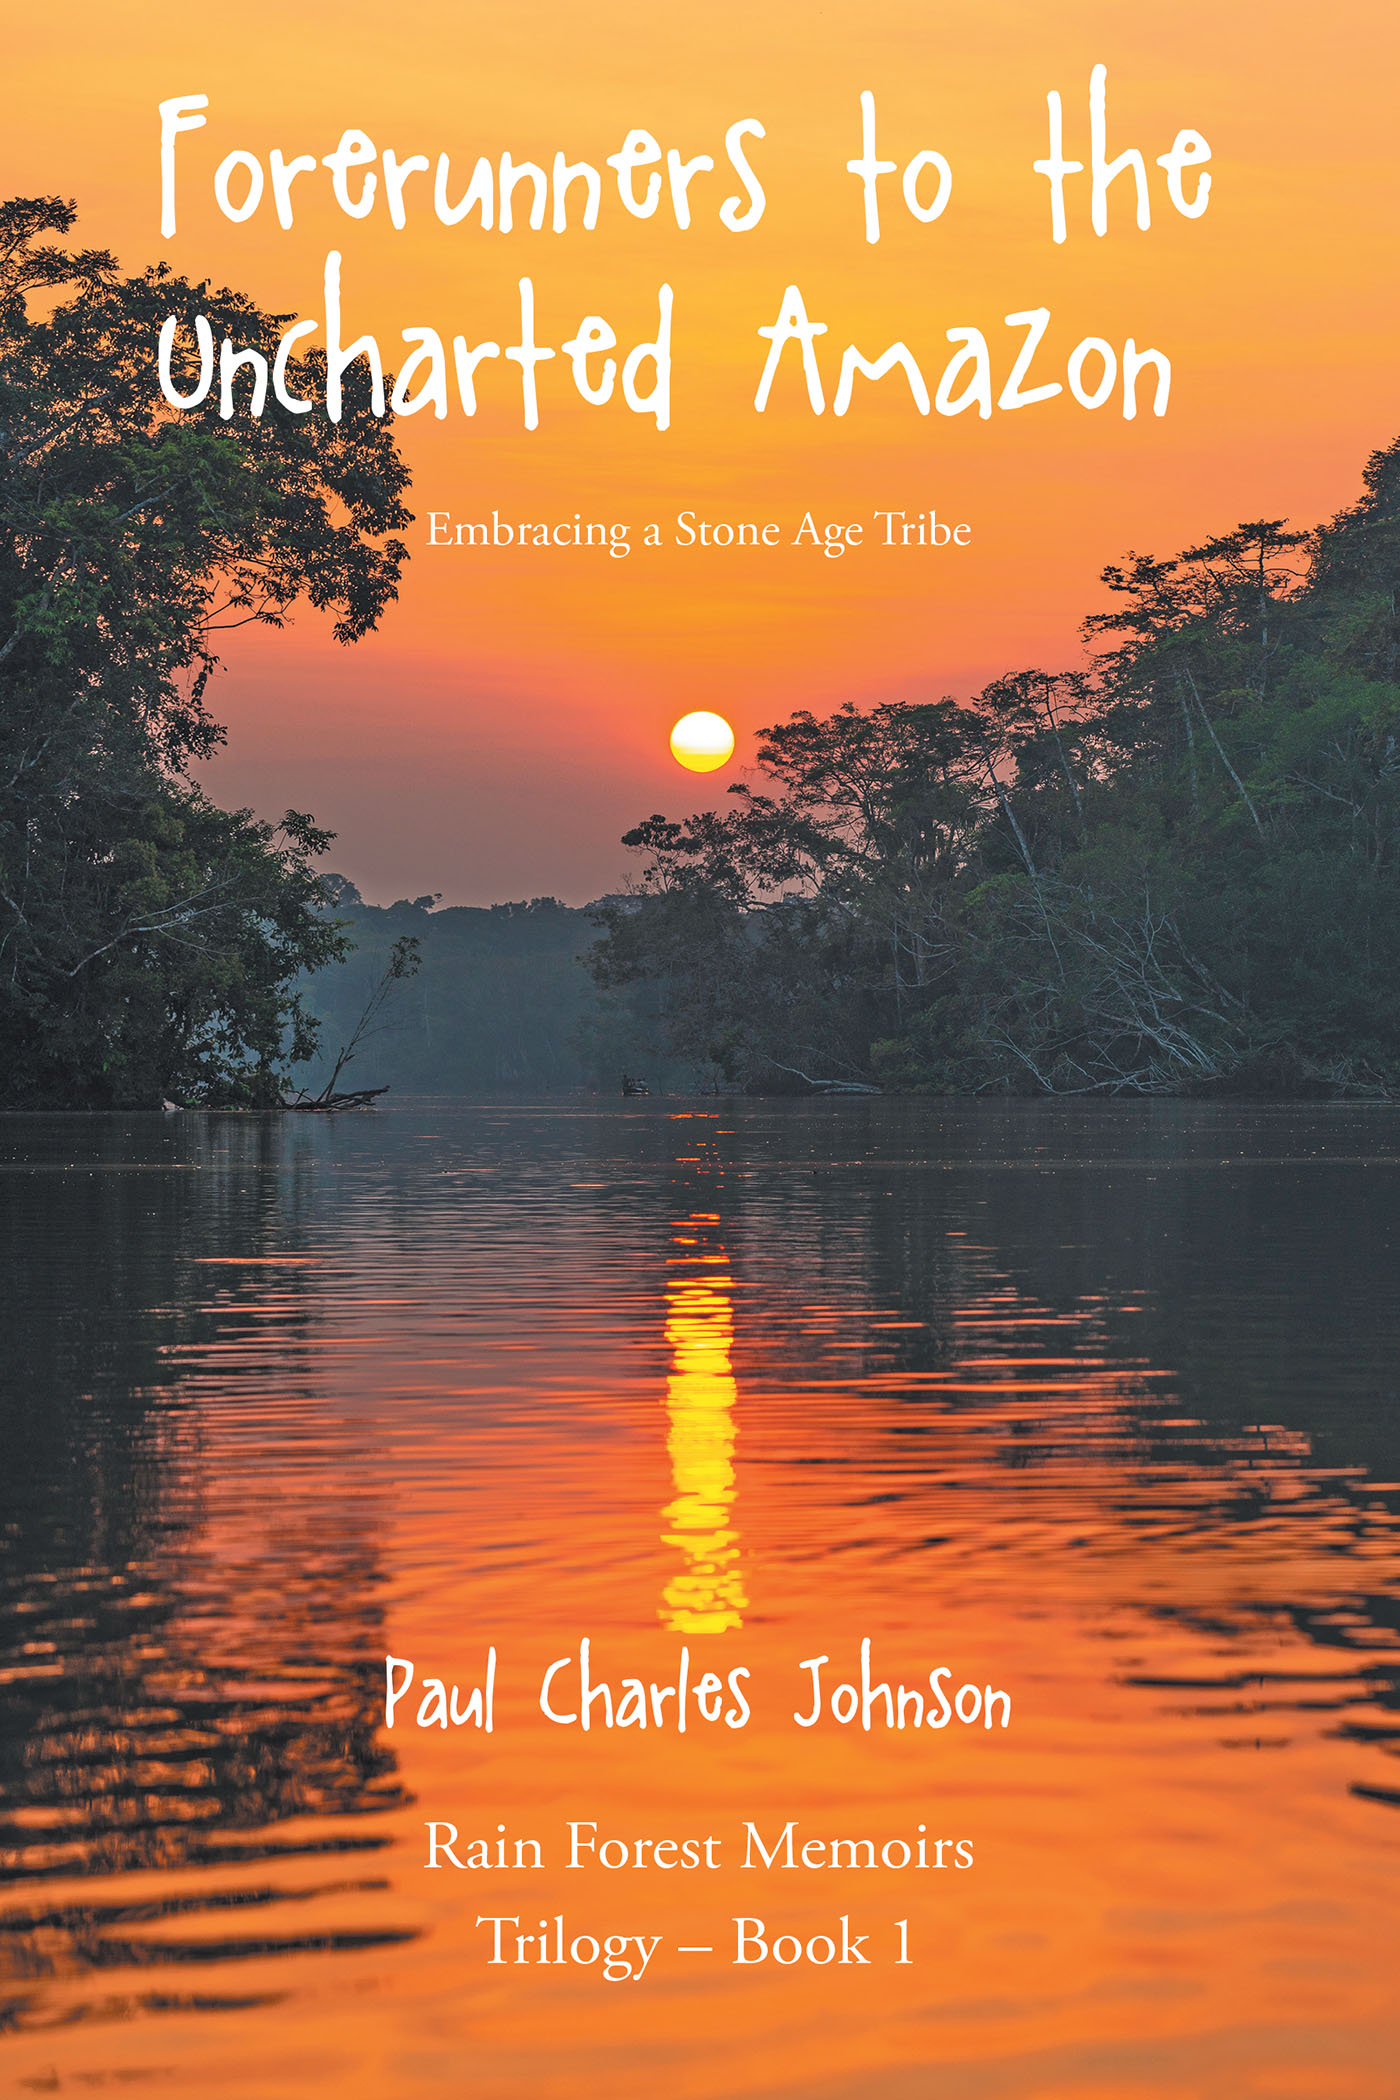 Paul Charles Johnson’s Newly Released "Forerunners to the Uncharted Amazon: Embracing a Stone Age Tribe" is a Compelling Look Into Life as a Missionary